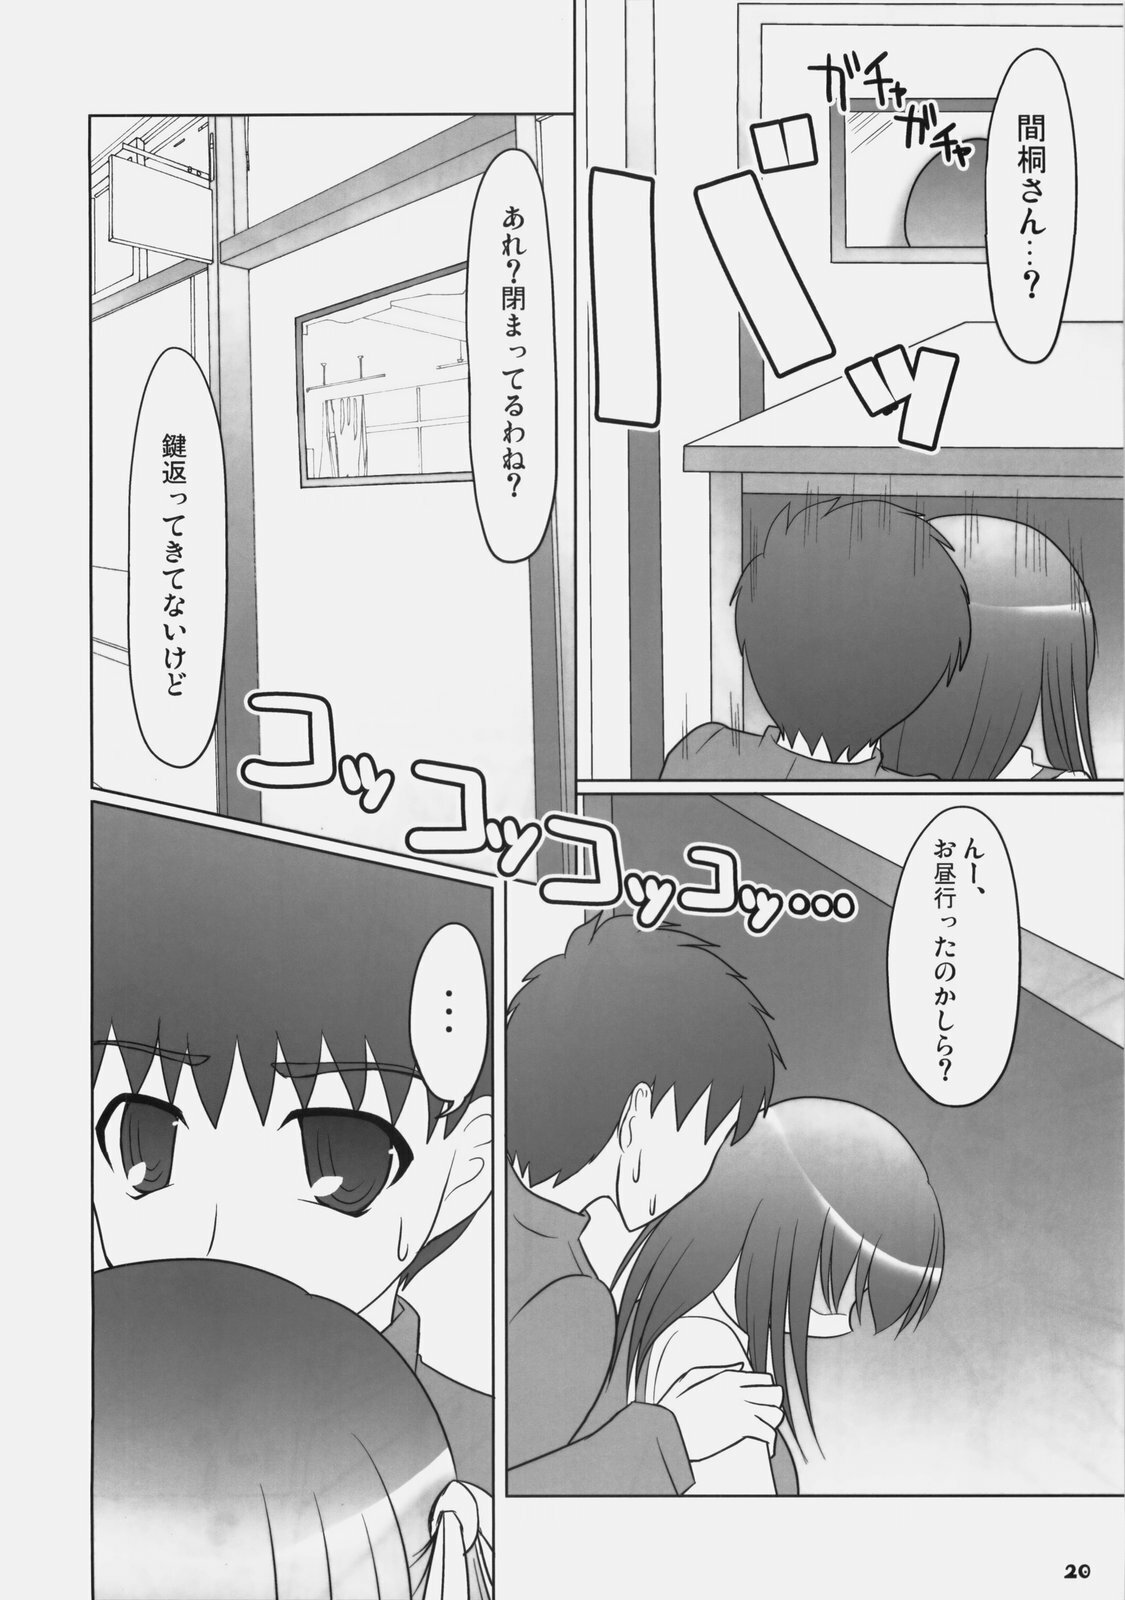 (C77) [Iron Plate (Yaki Ohagi)] Lunch Time! [2nd Edition] (Fate/stay night) page 19 full